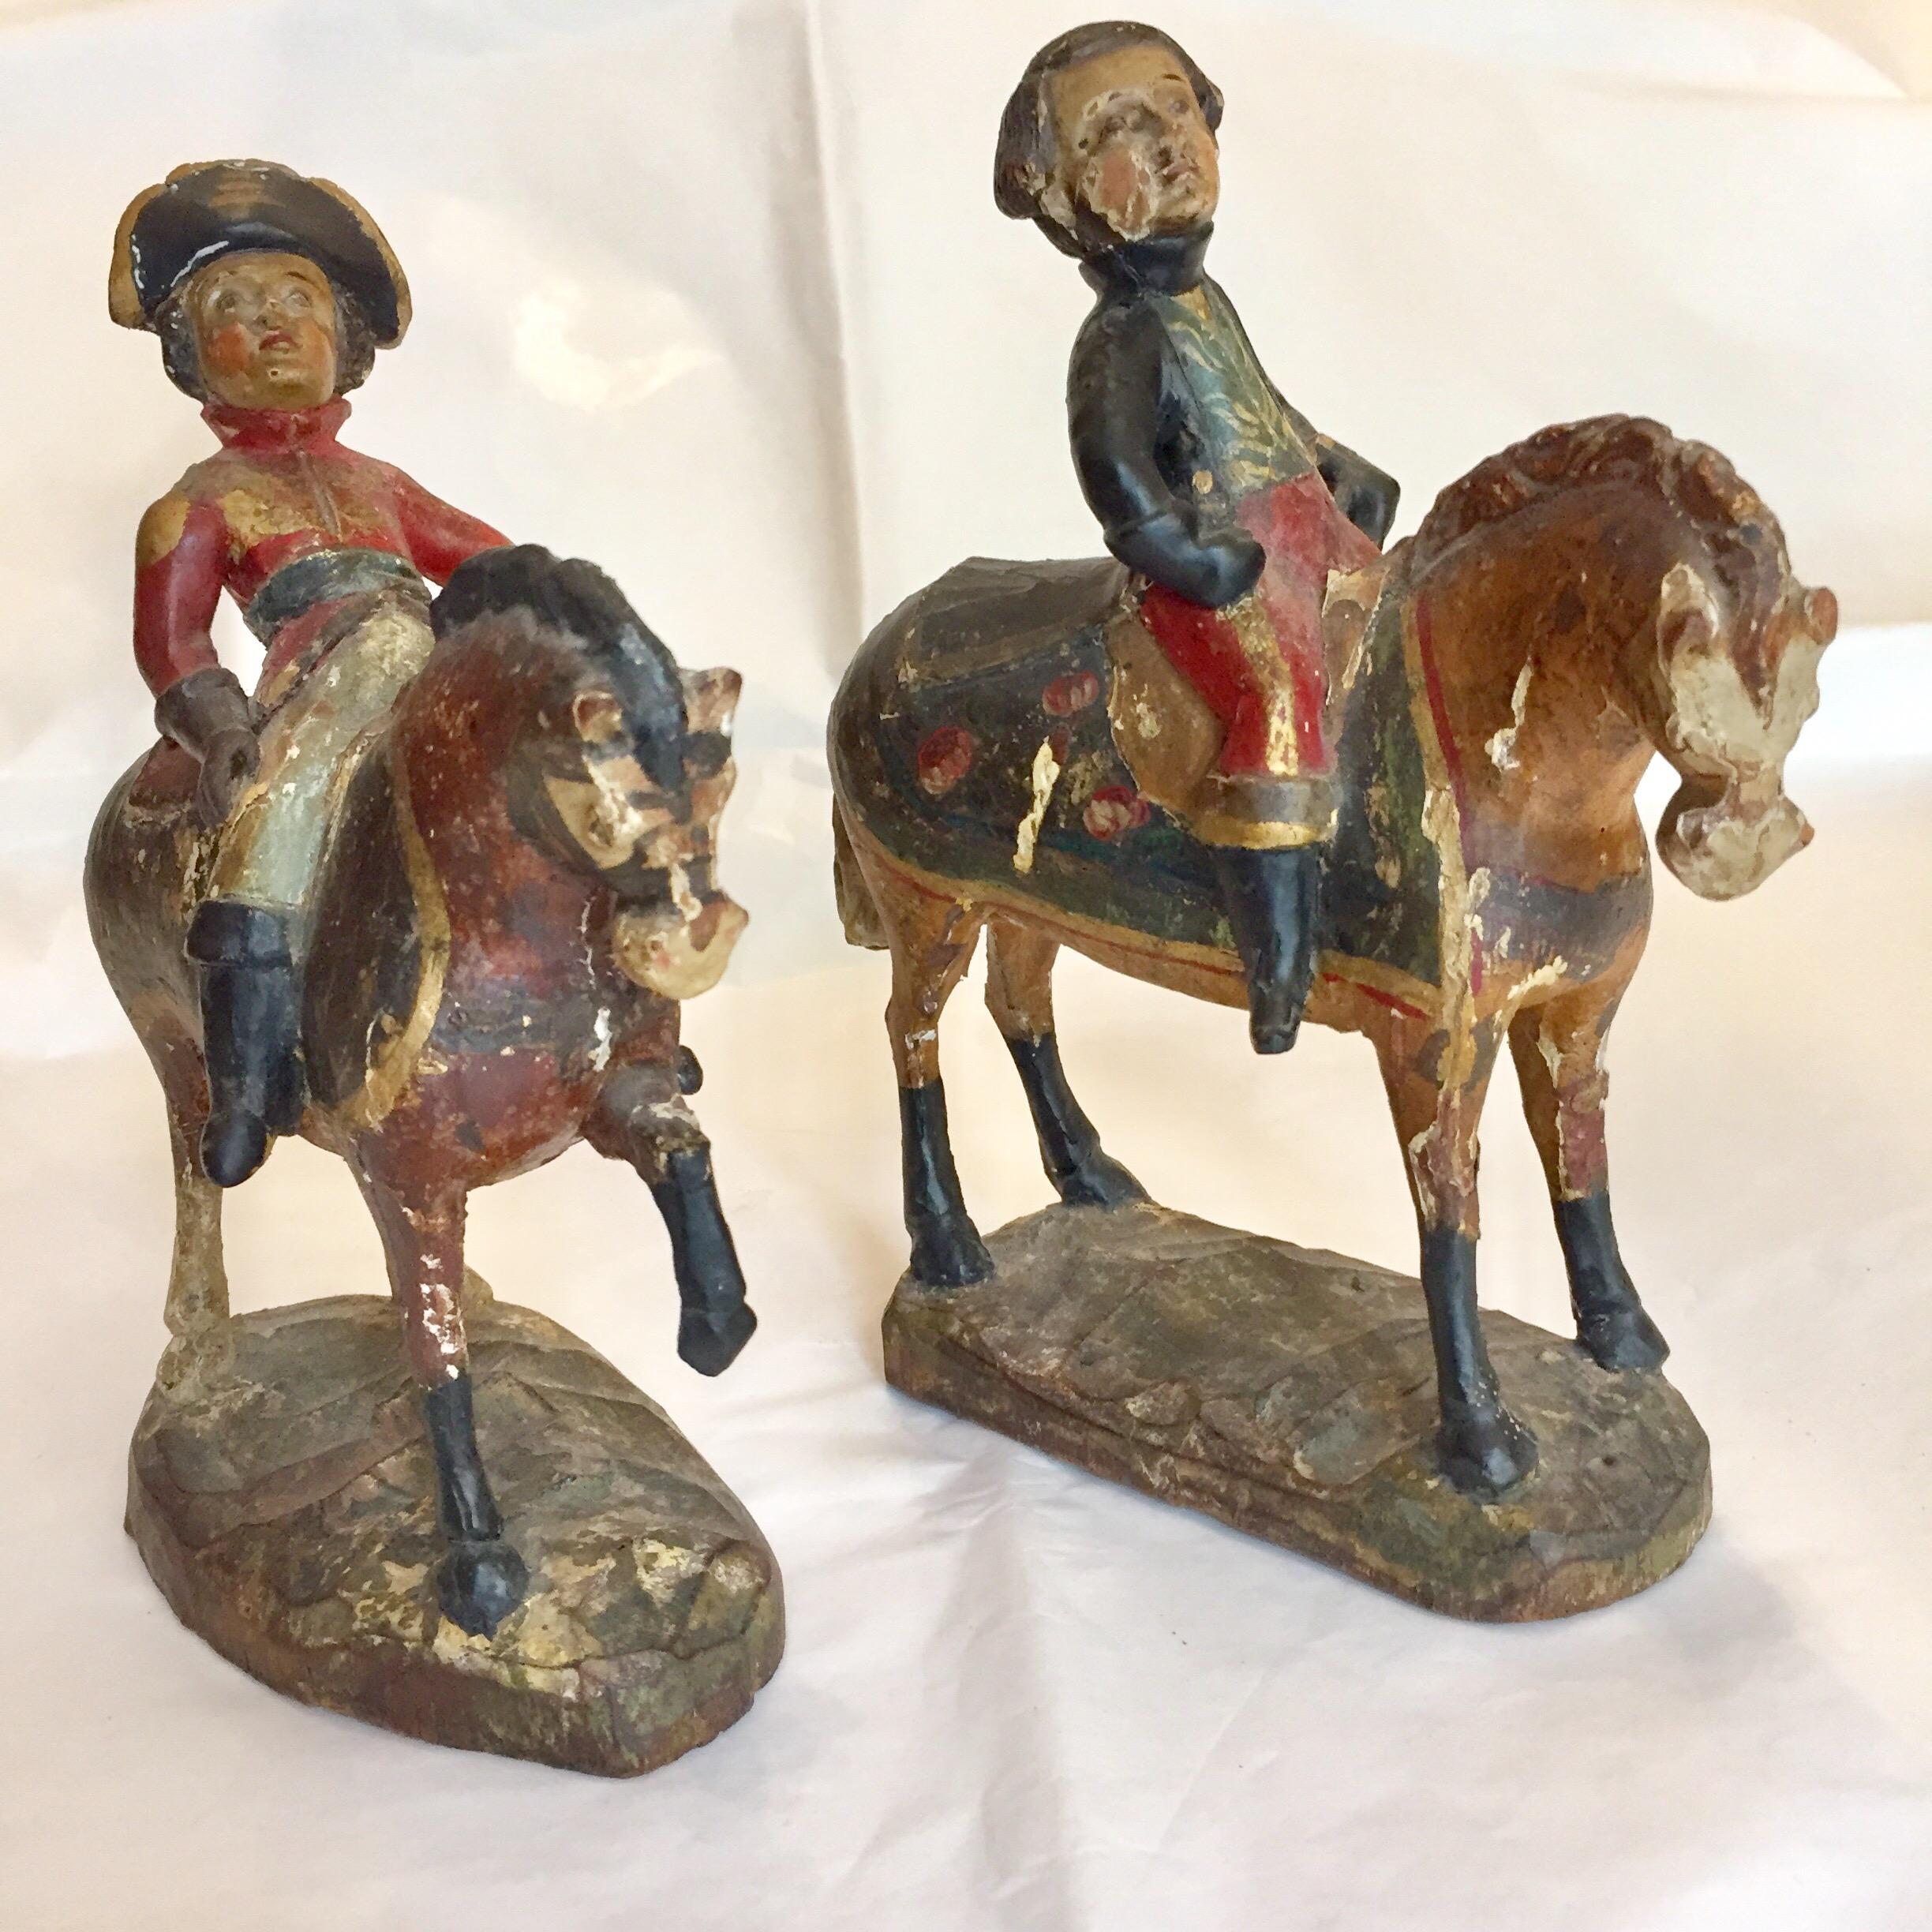 Hand-Carved 19th Century Italian Pair of Knights Sculptures Hand Carved Equestrian Soldiers